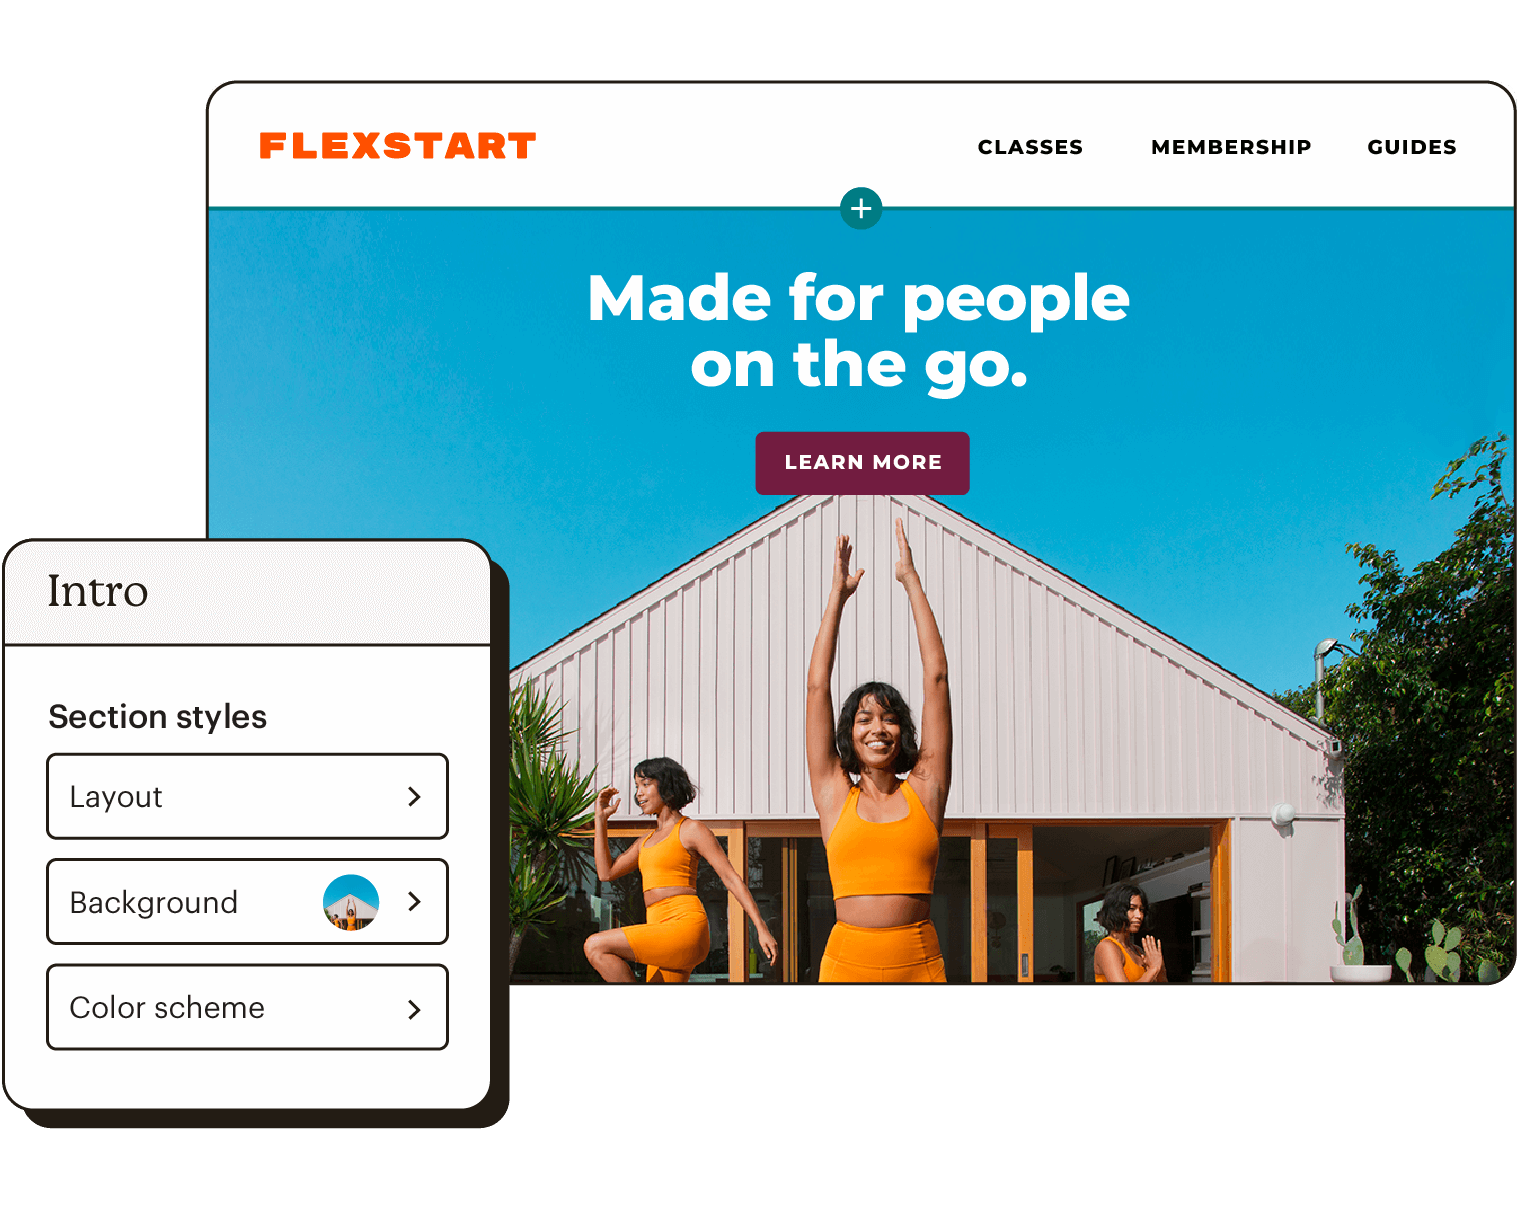 Abstract UI of a website for a business called Flexstart. There is also a box that shows that users can customize the layout, background, and color scheme.